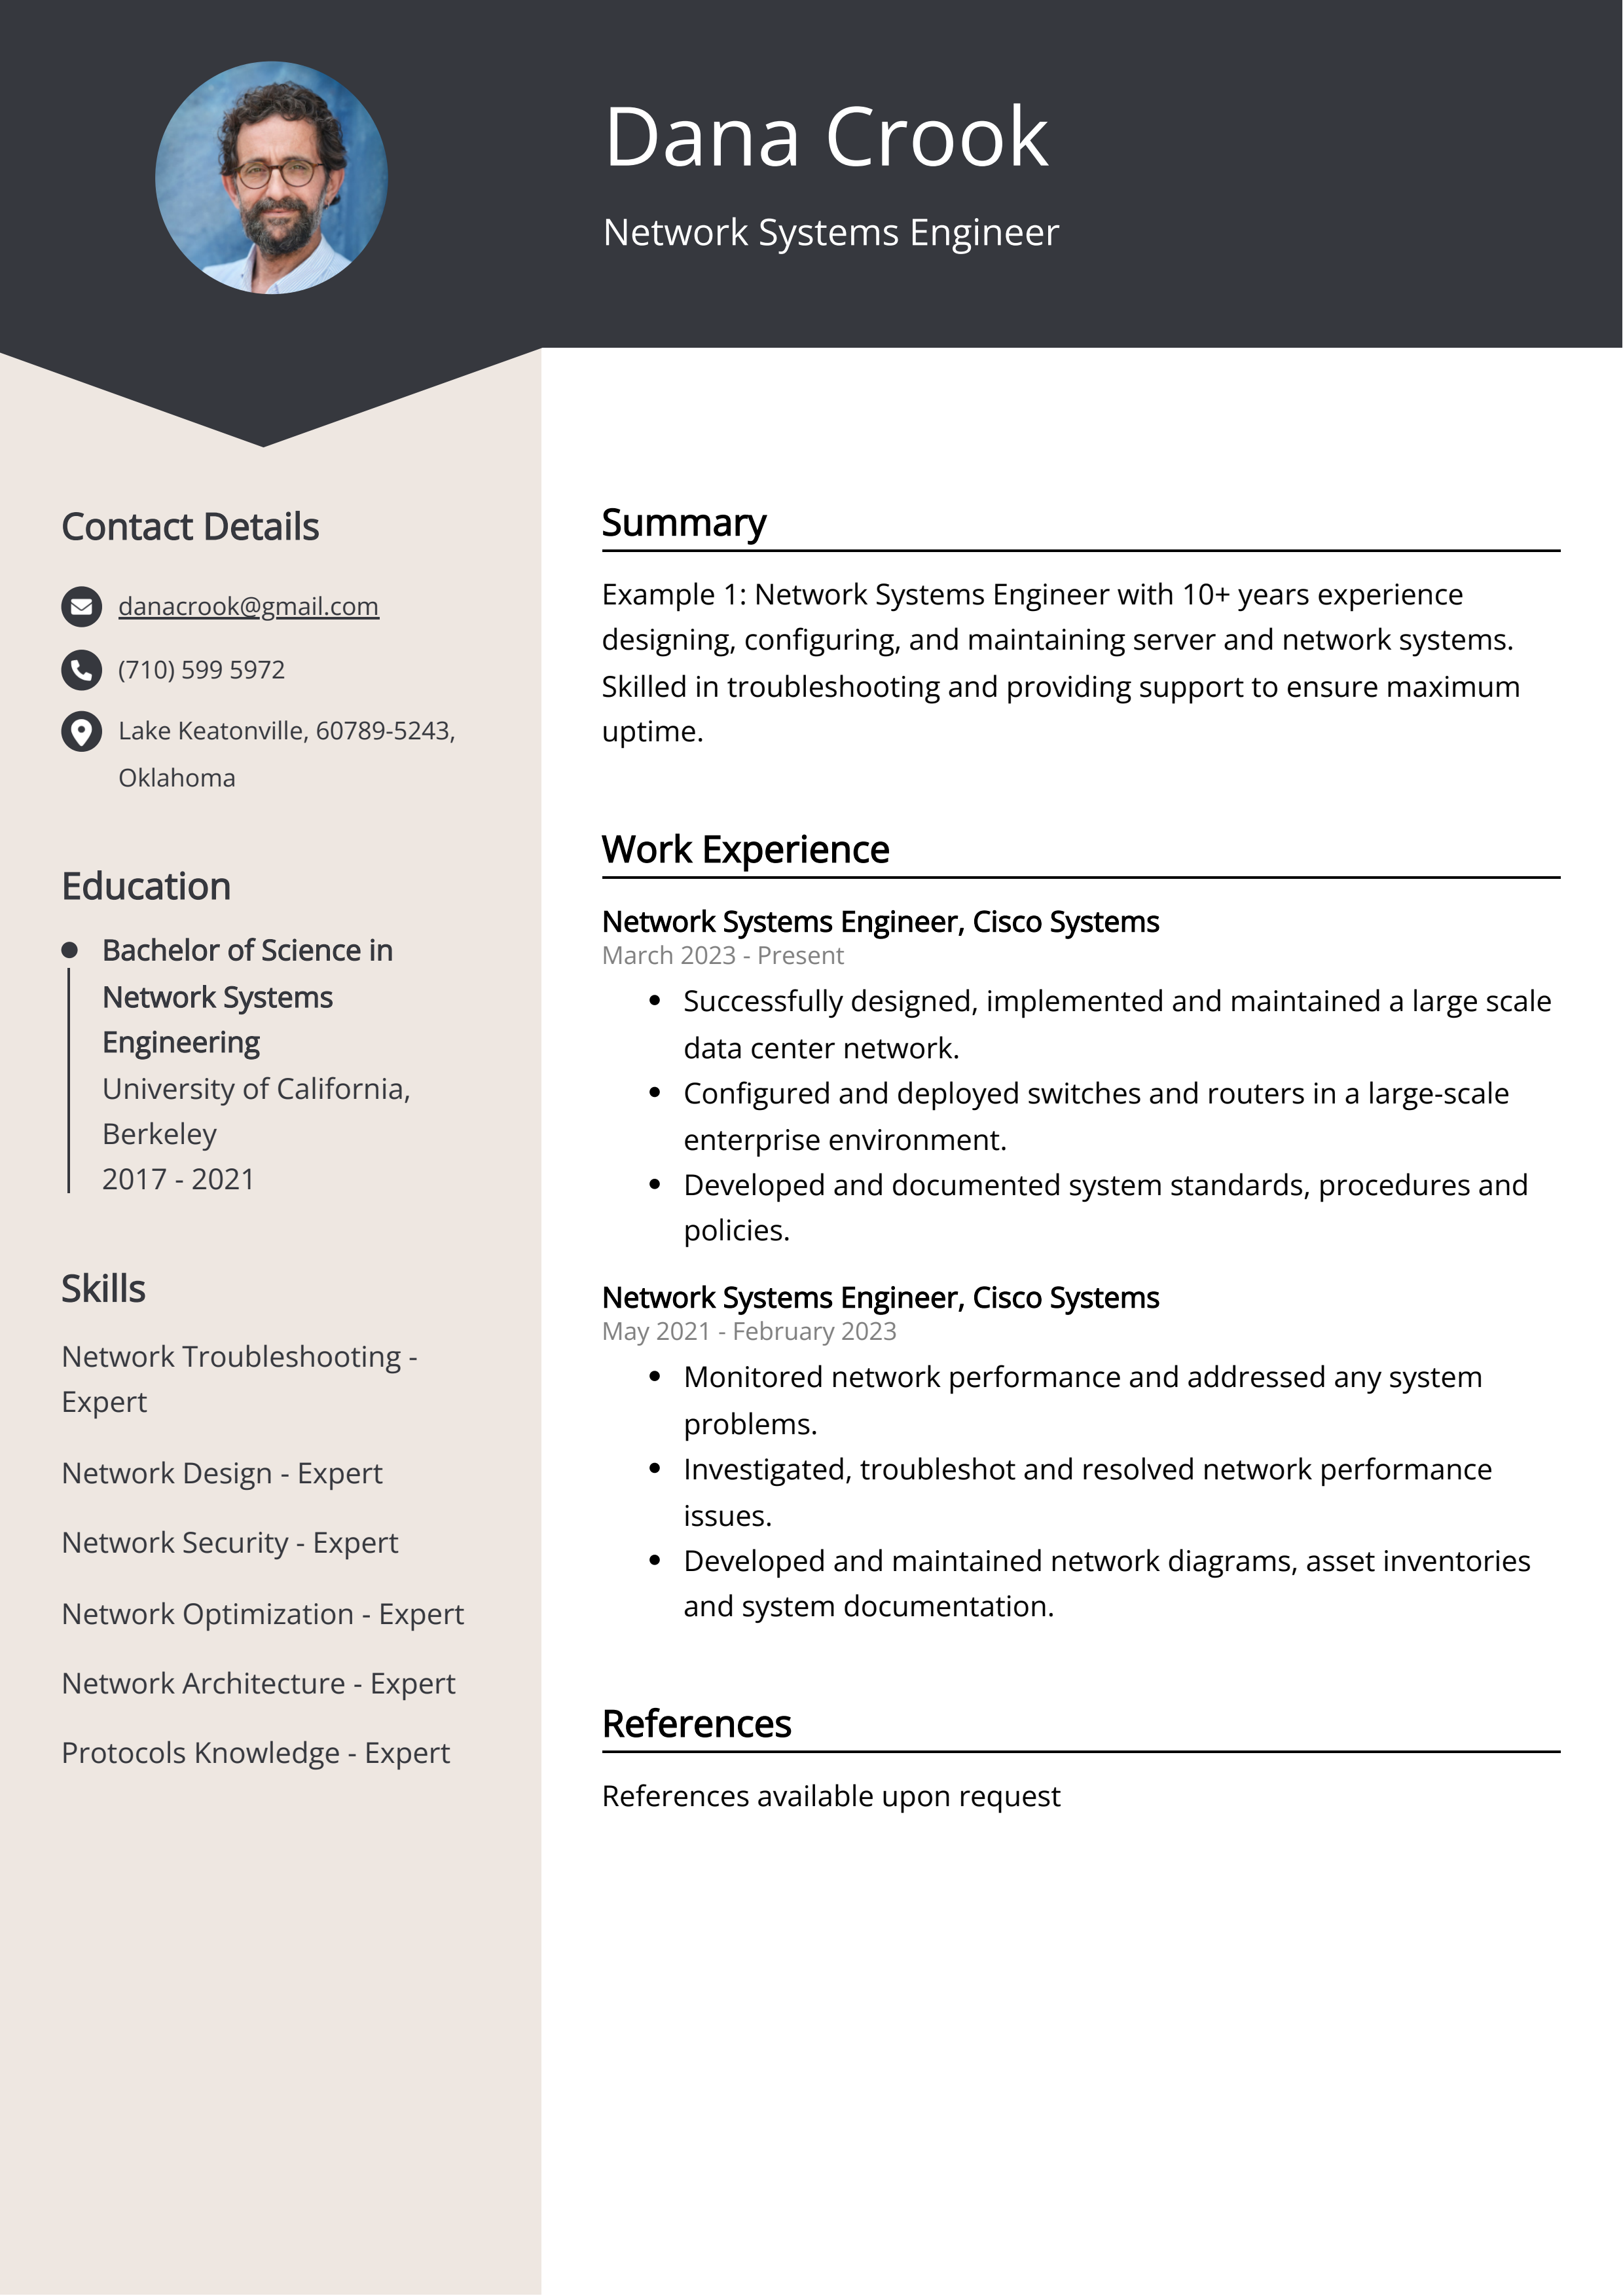 Network Systems Engineer CV Example